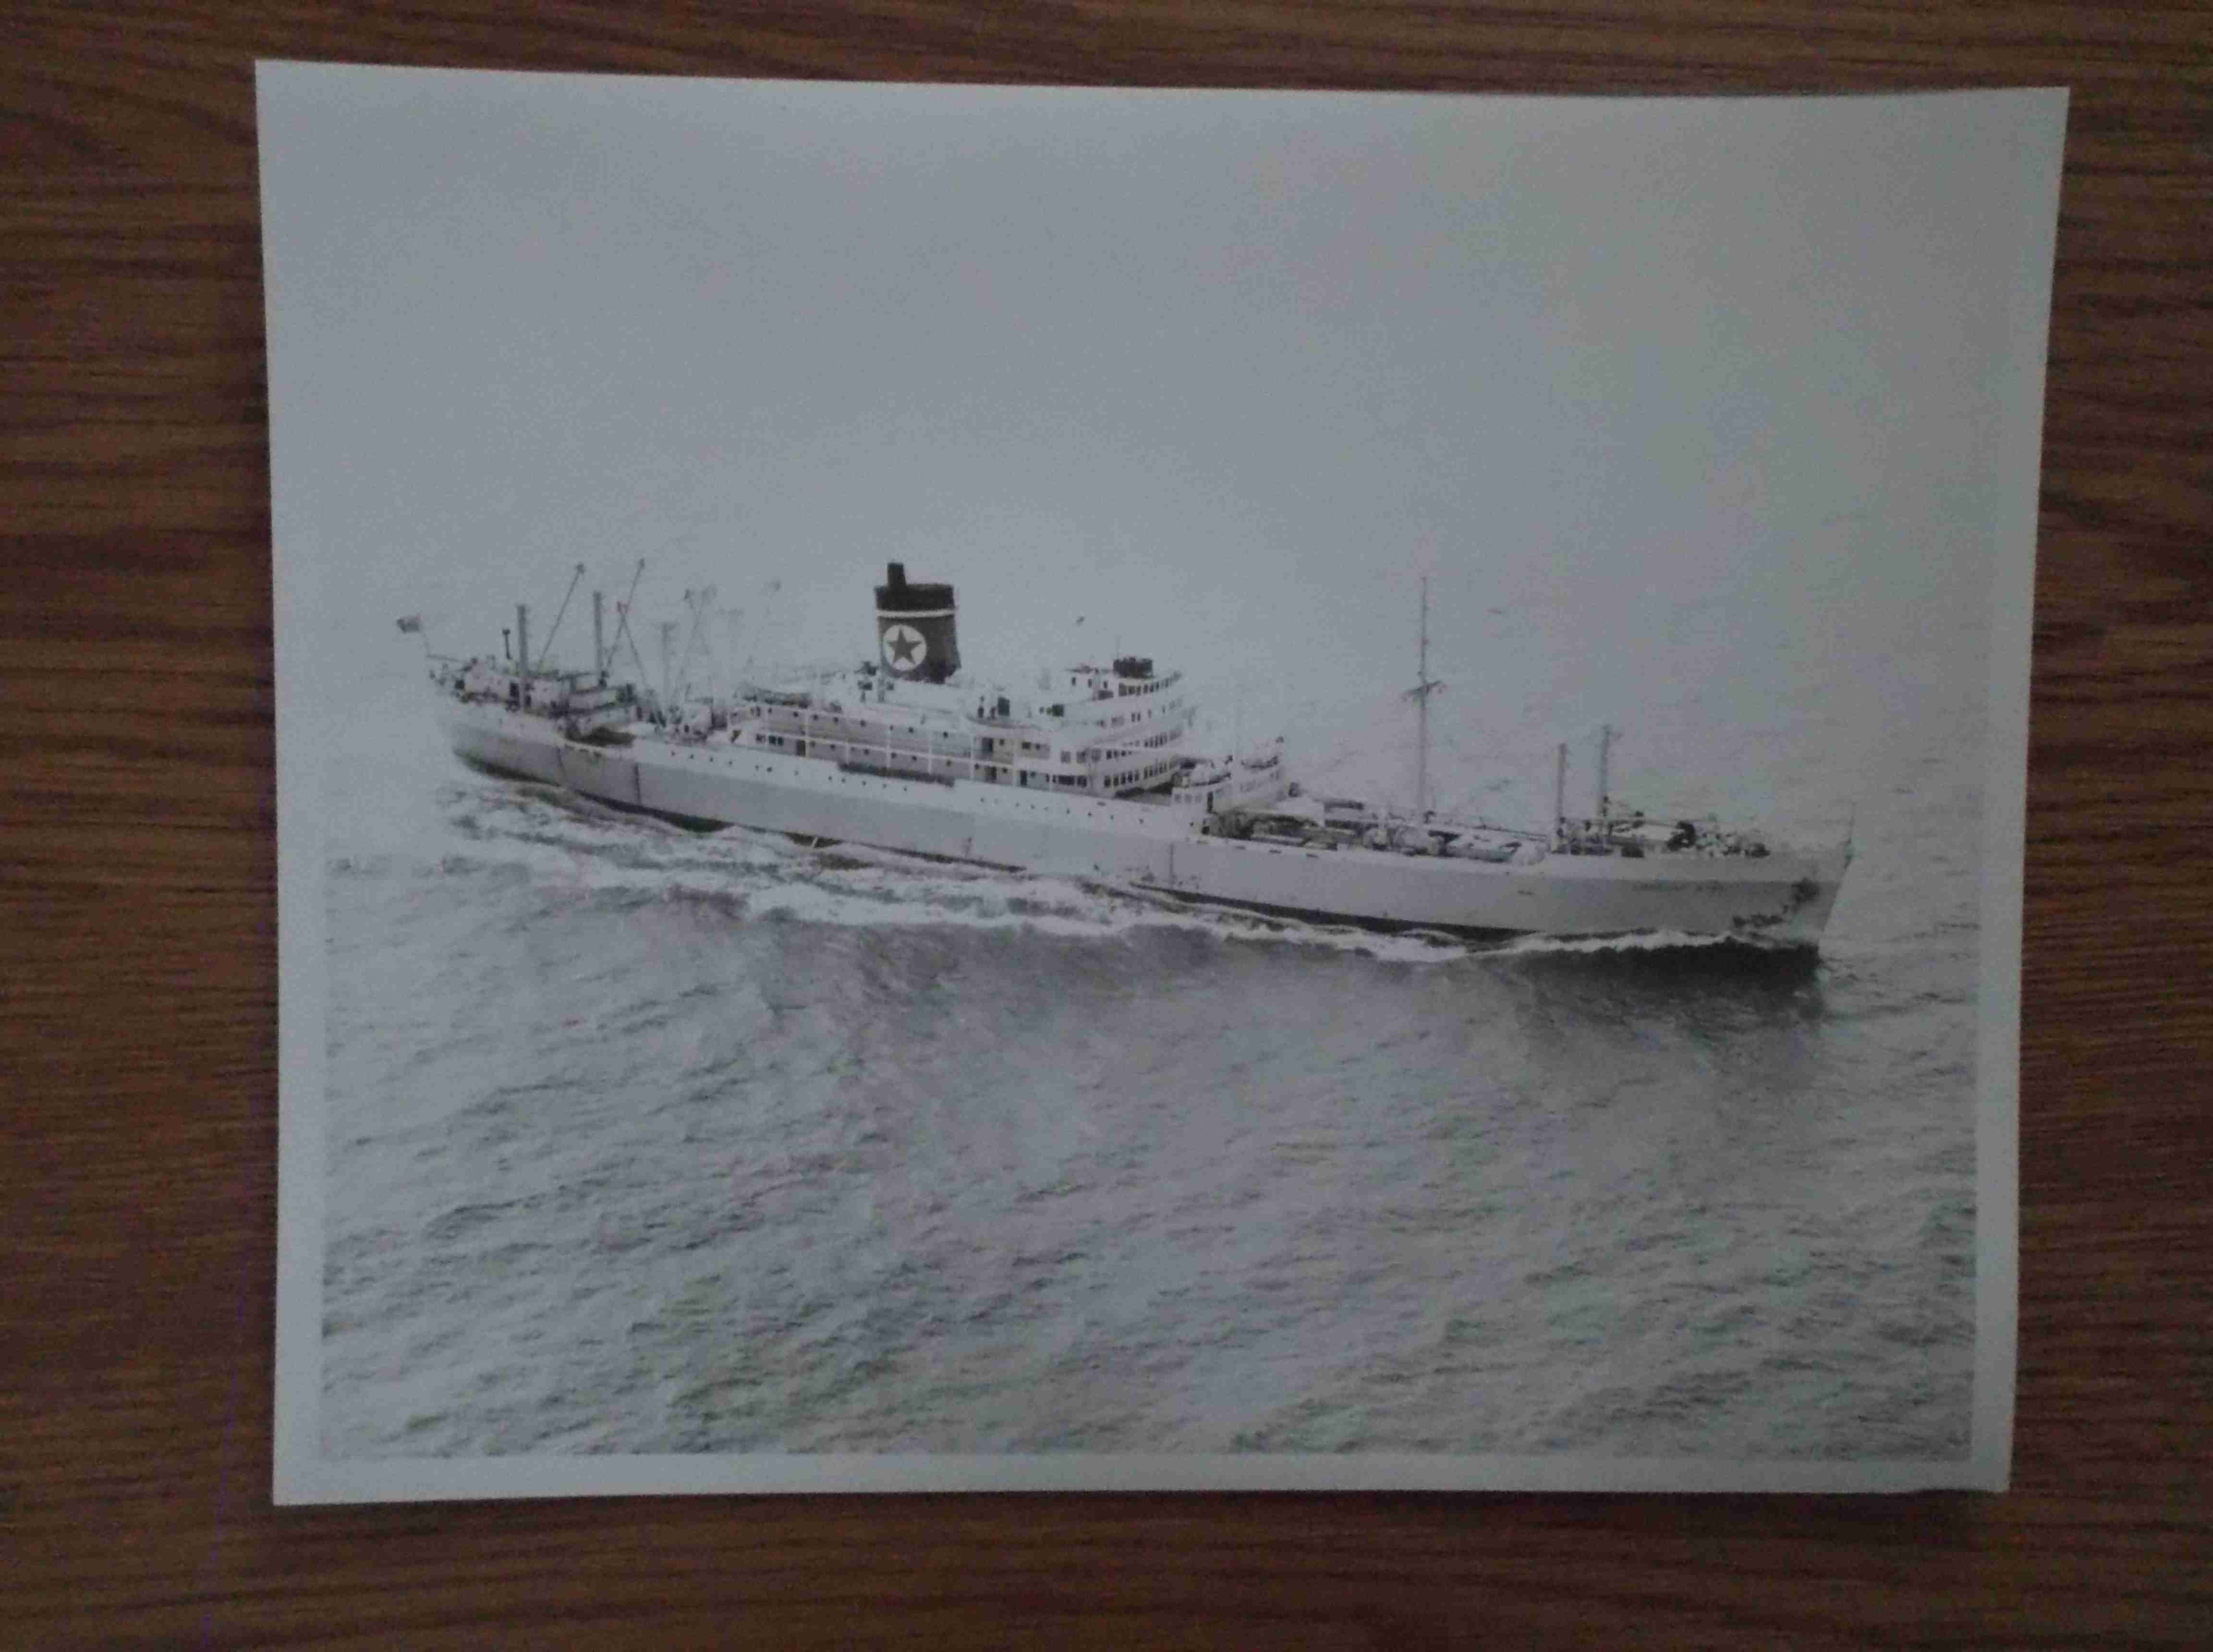 LARGE B/W PHOTOGRAPH OF THE BLUE STAR LINE VESSEL THE URUGUAY STAR